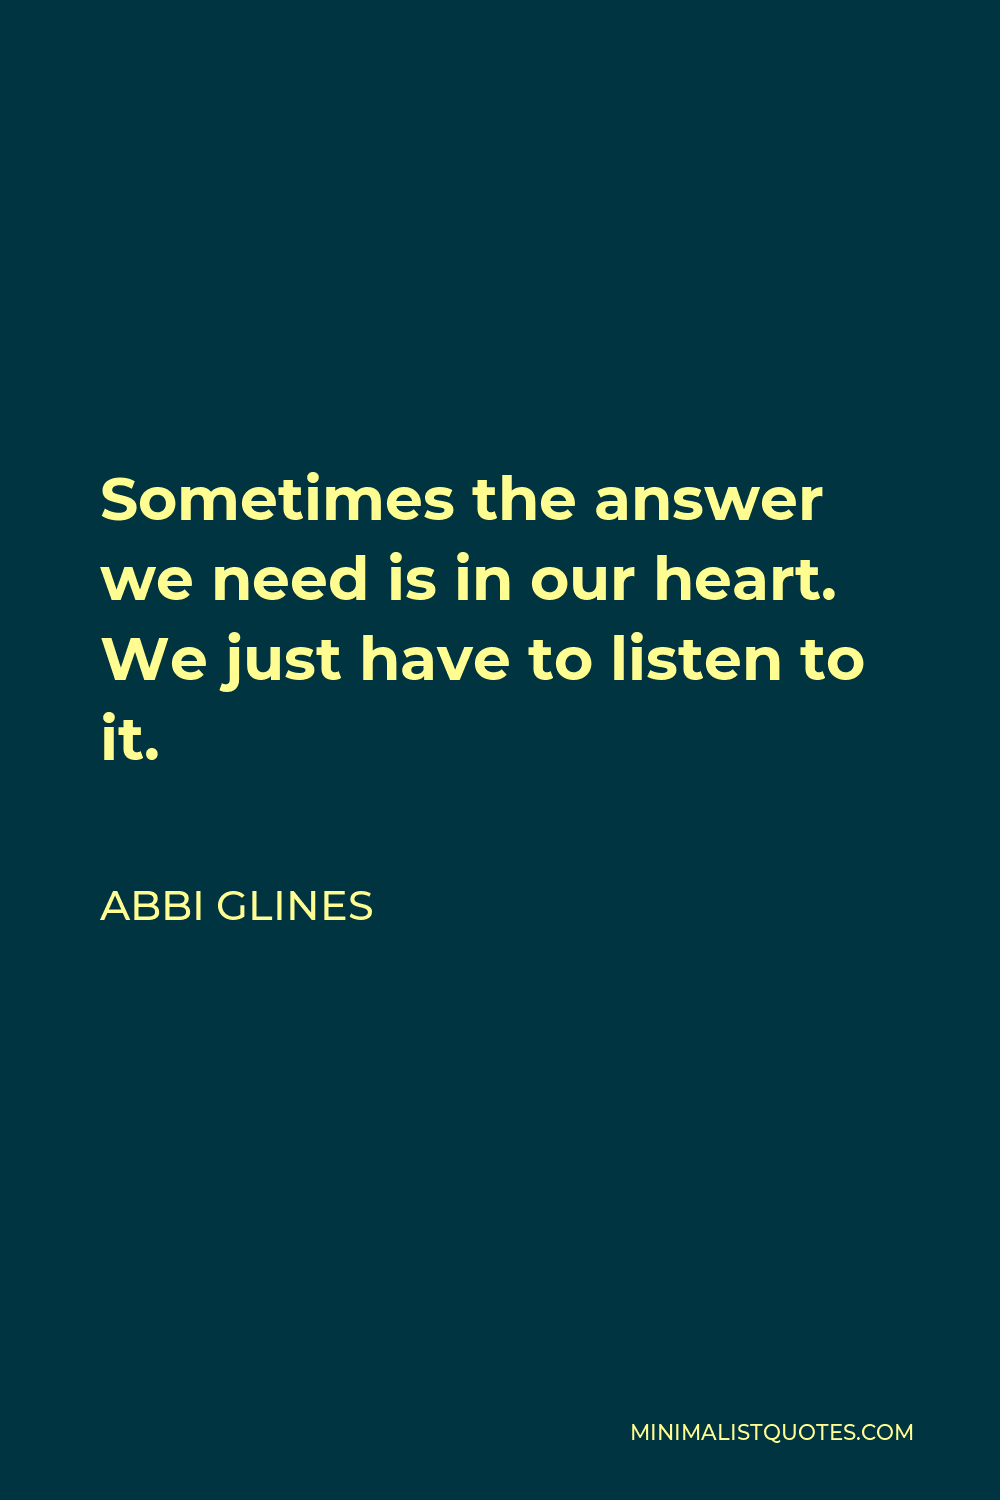 Abbi Glines Quote - Sometimes the answer we need is in our heart. We just have to listen to it.